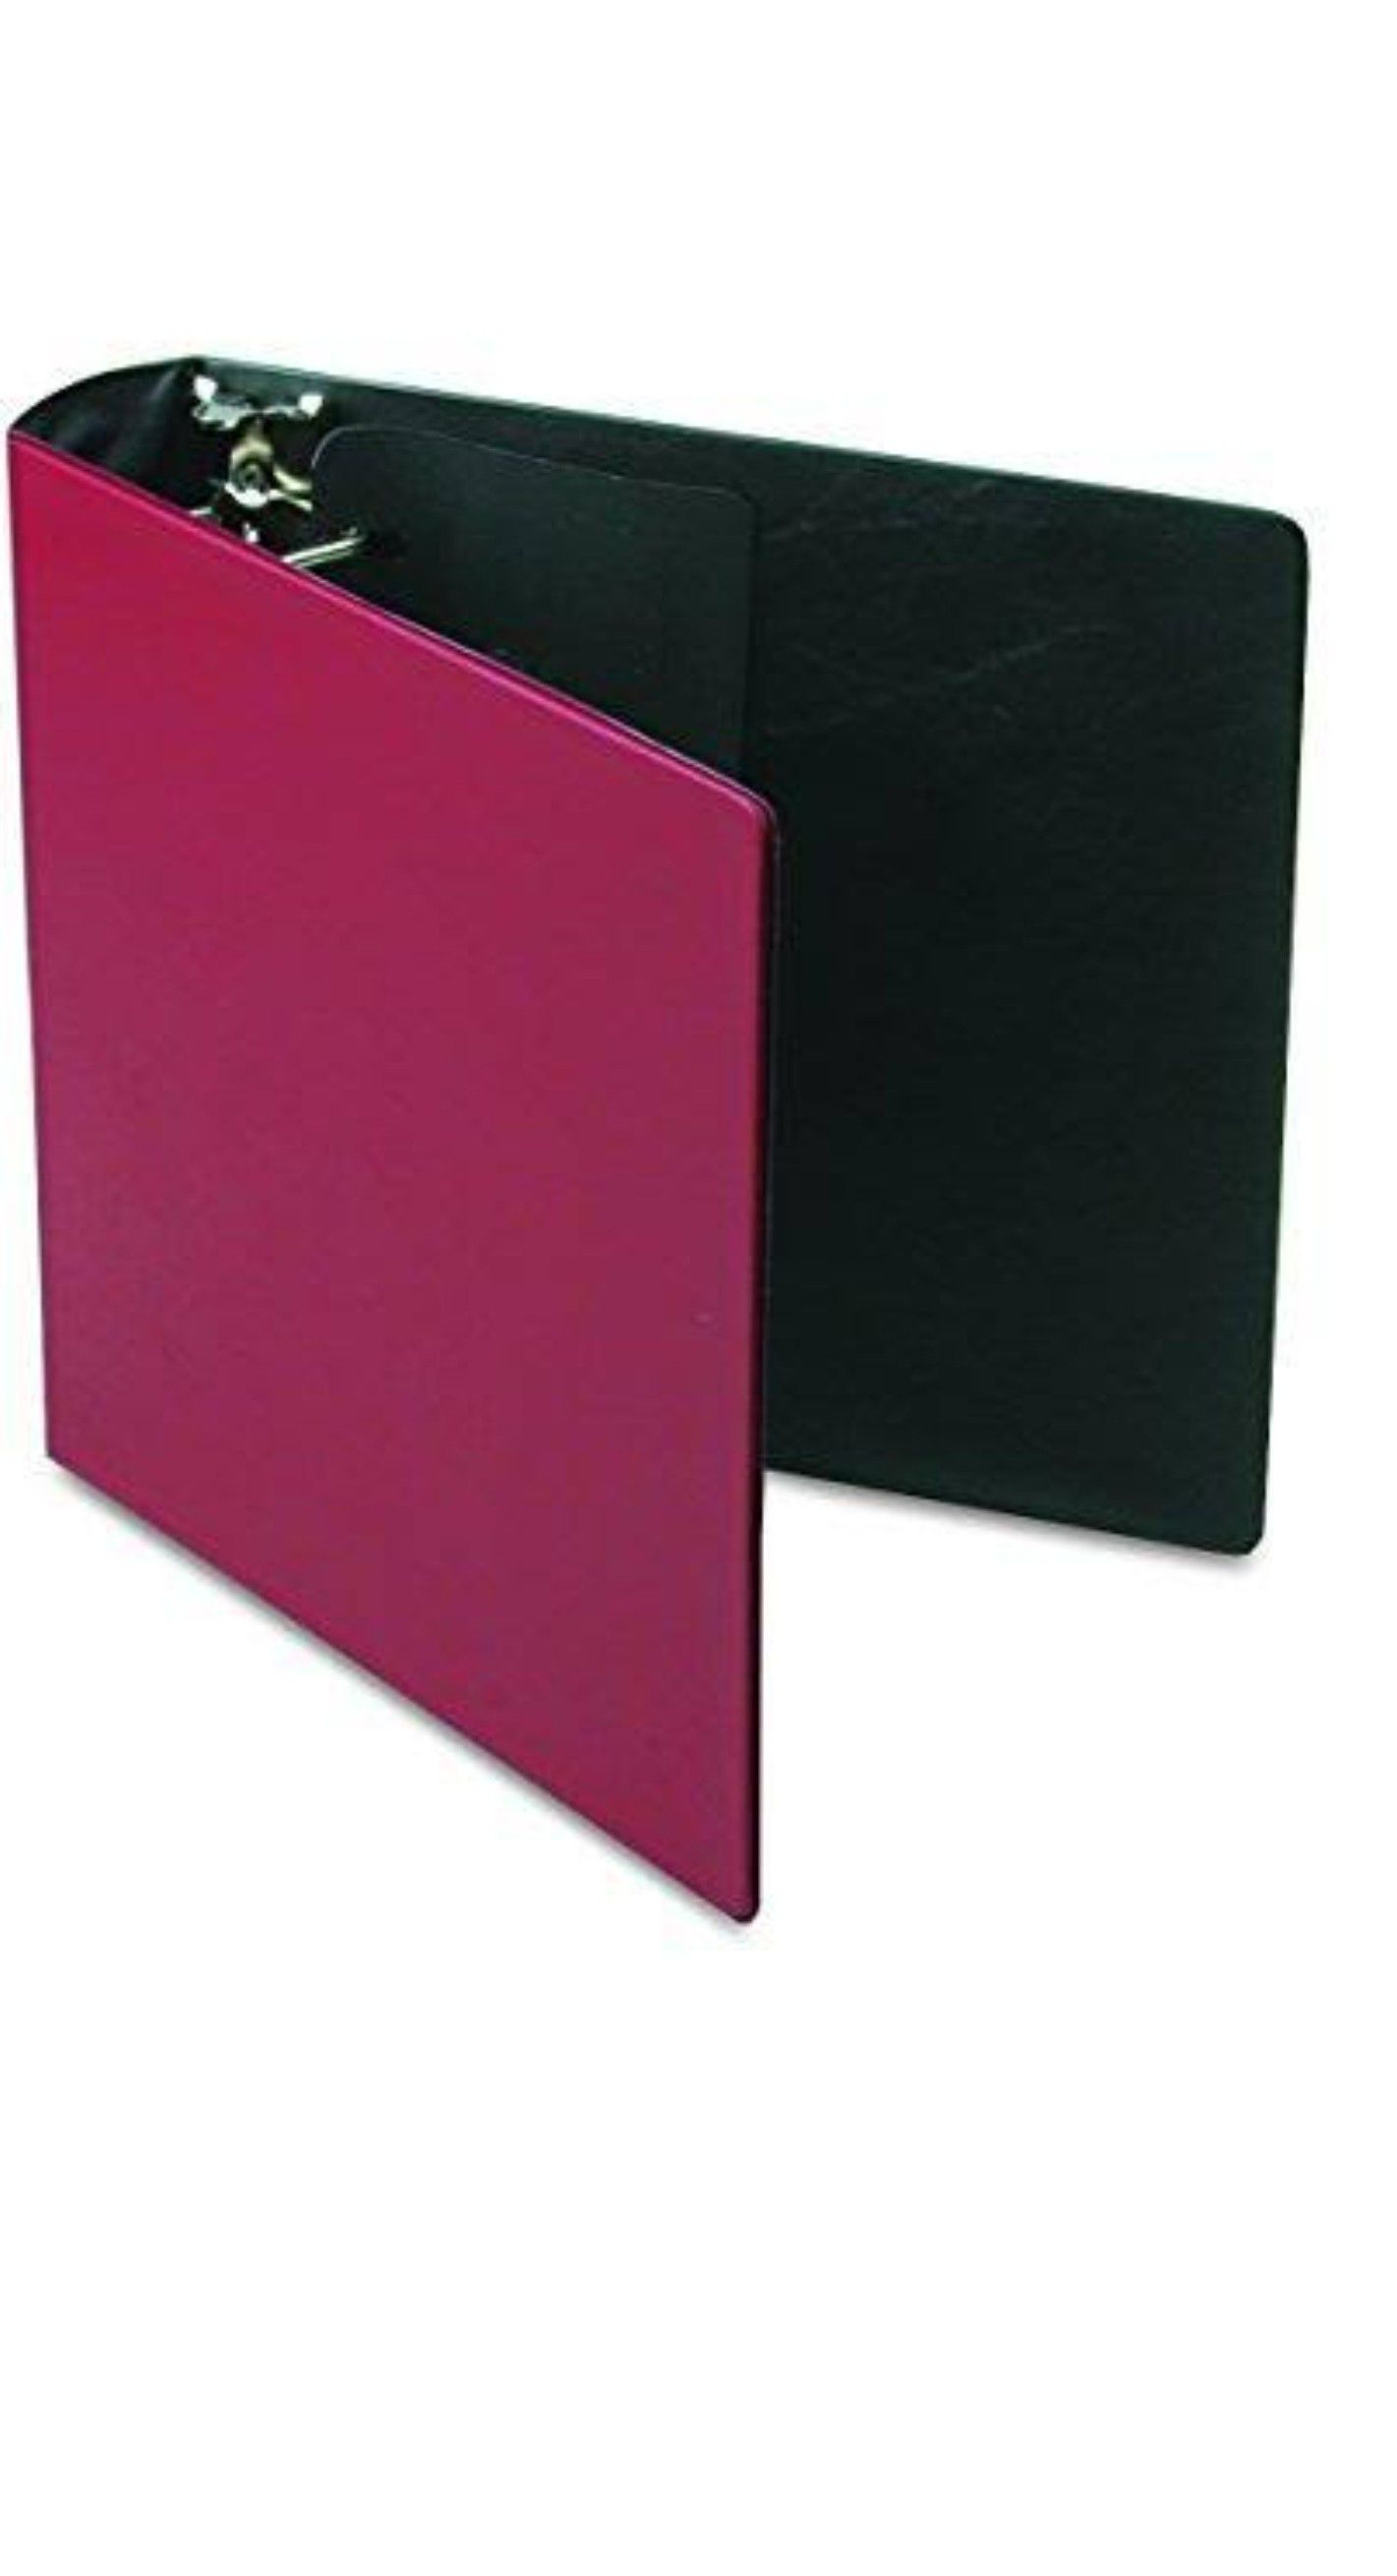 Binders-Set of 11 for $7.00